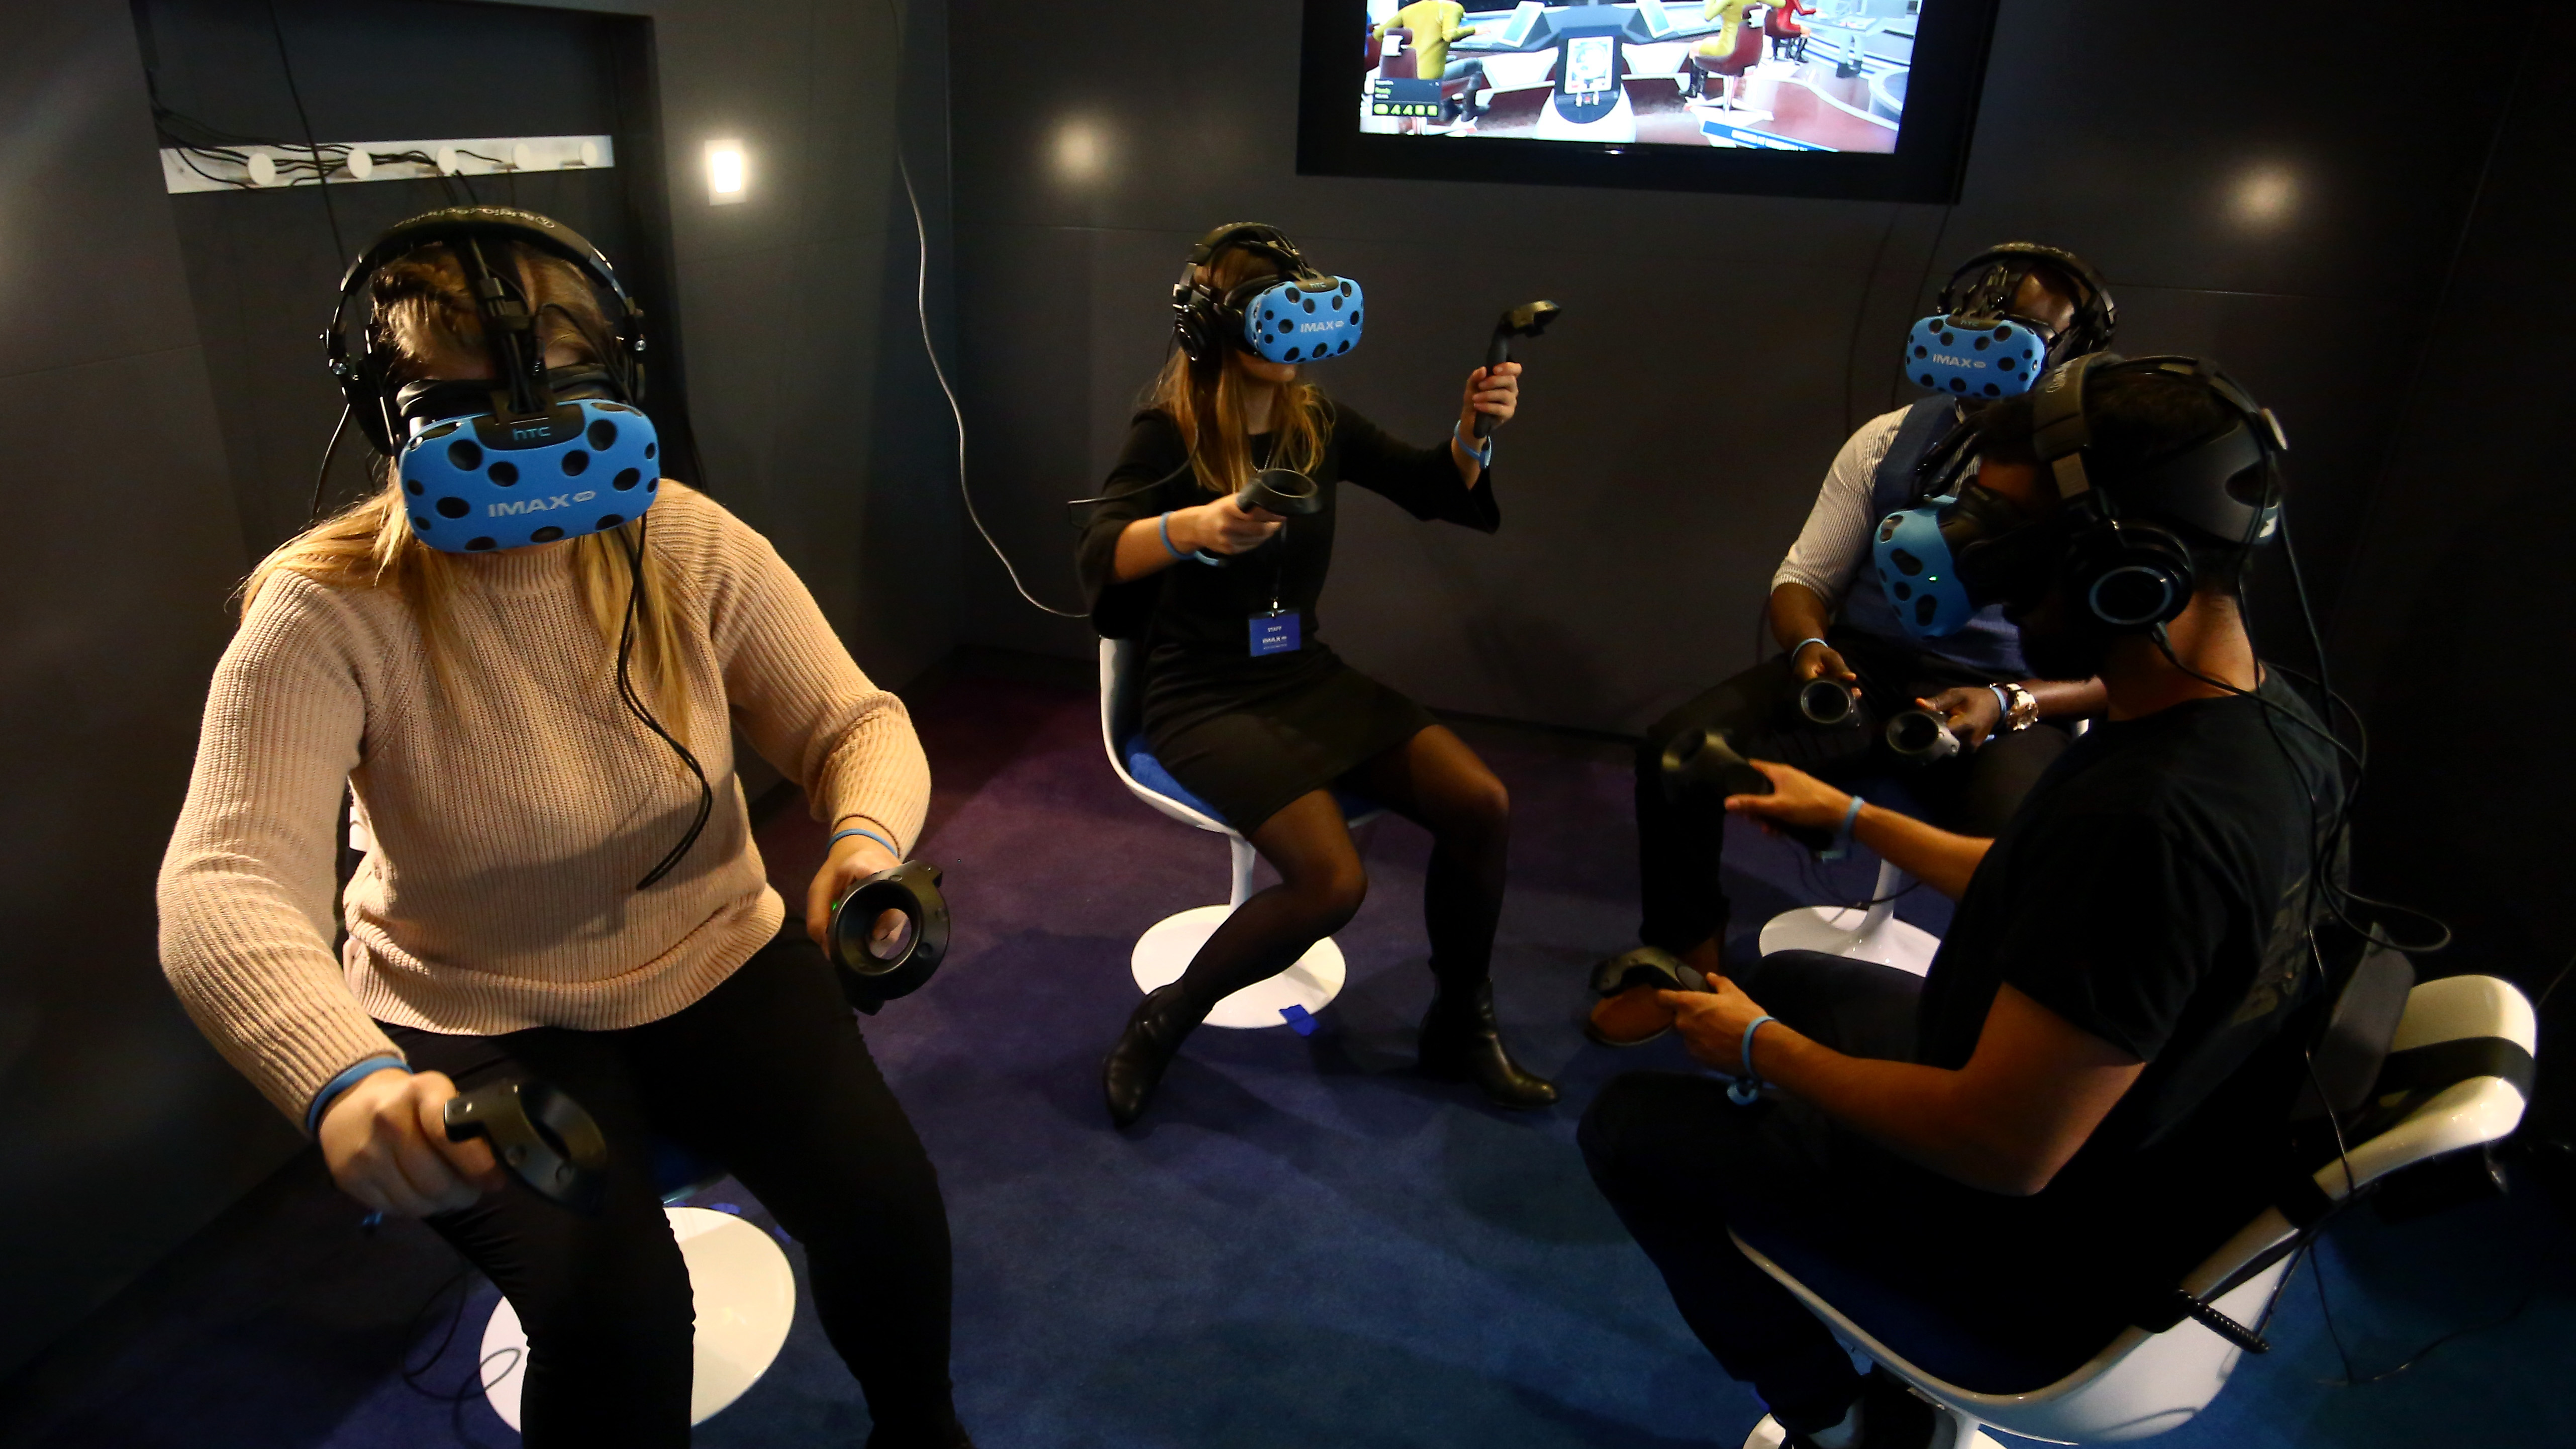 Multiplayer gaming in VR what’s it like? TechRadar